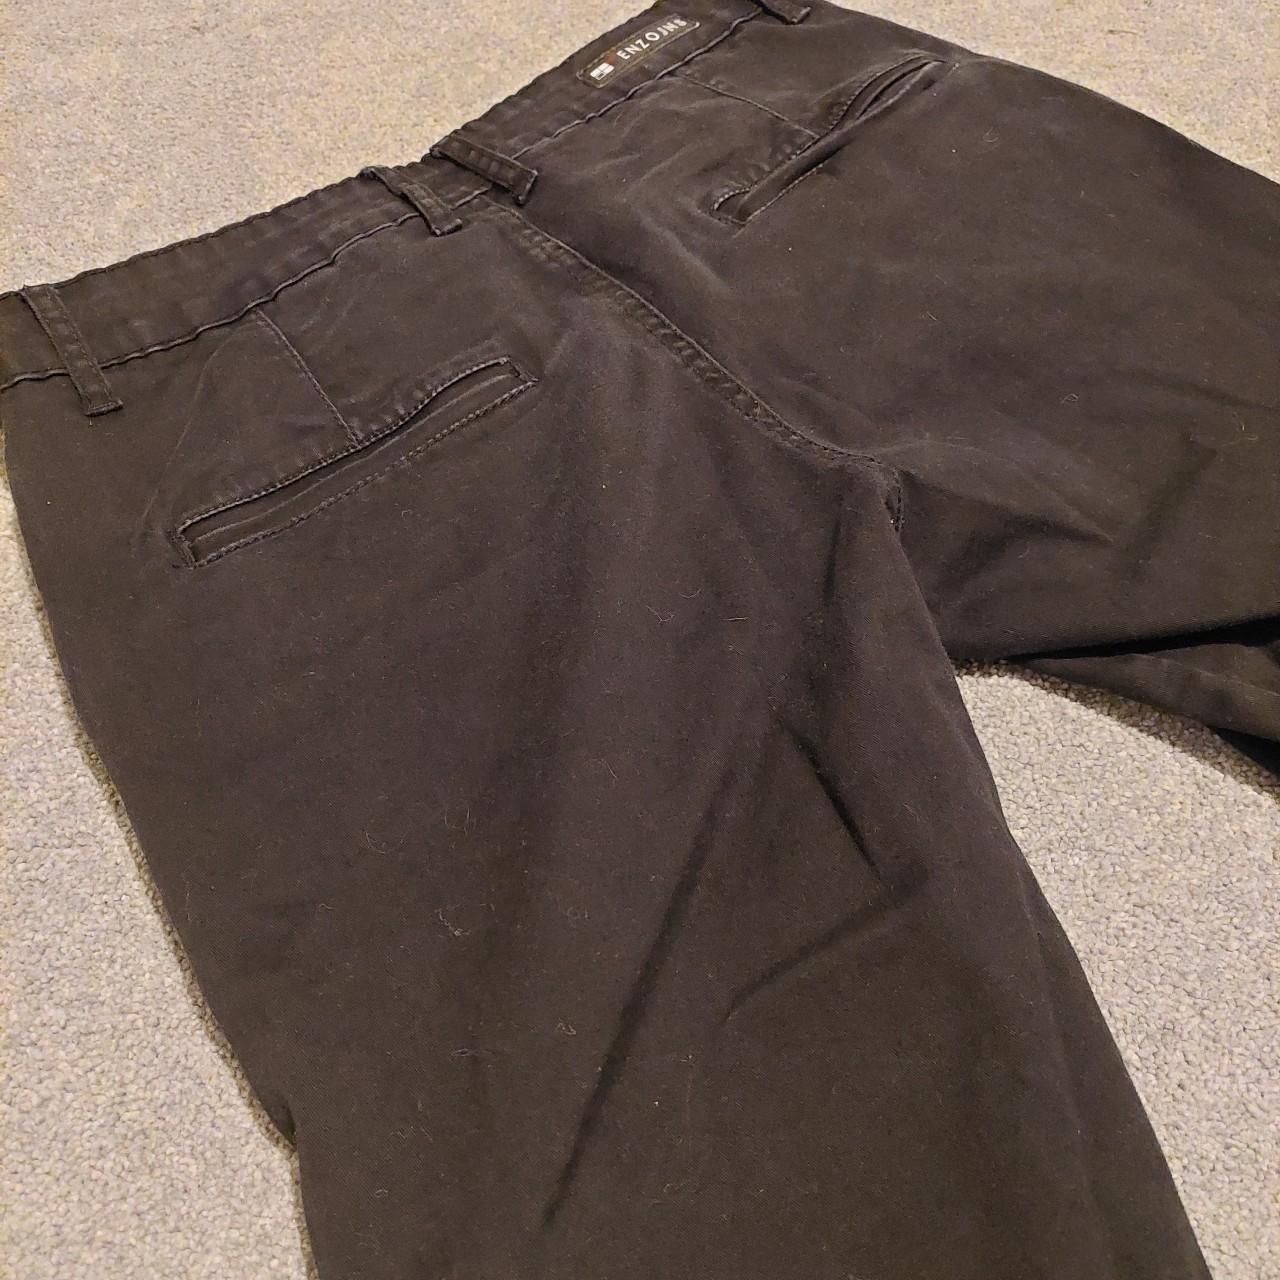 Black Enzo Jns Cargo pants, In great condition they... - Depop